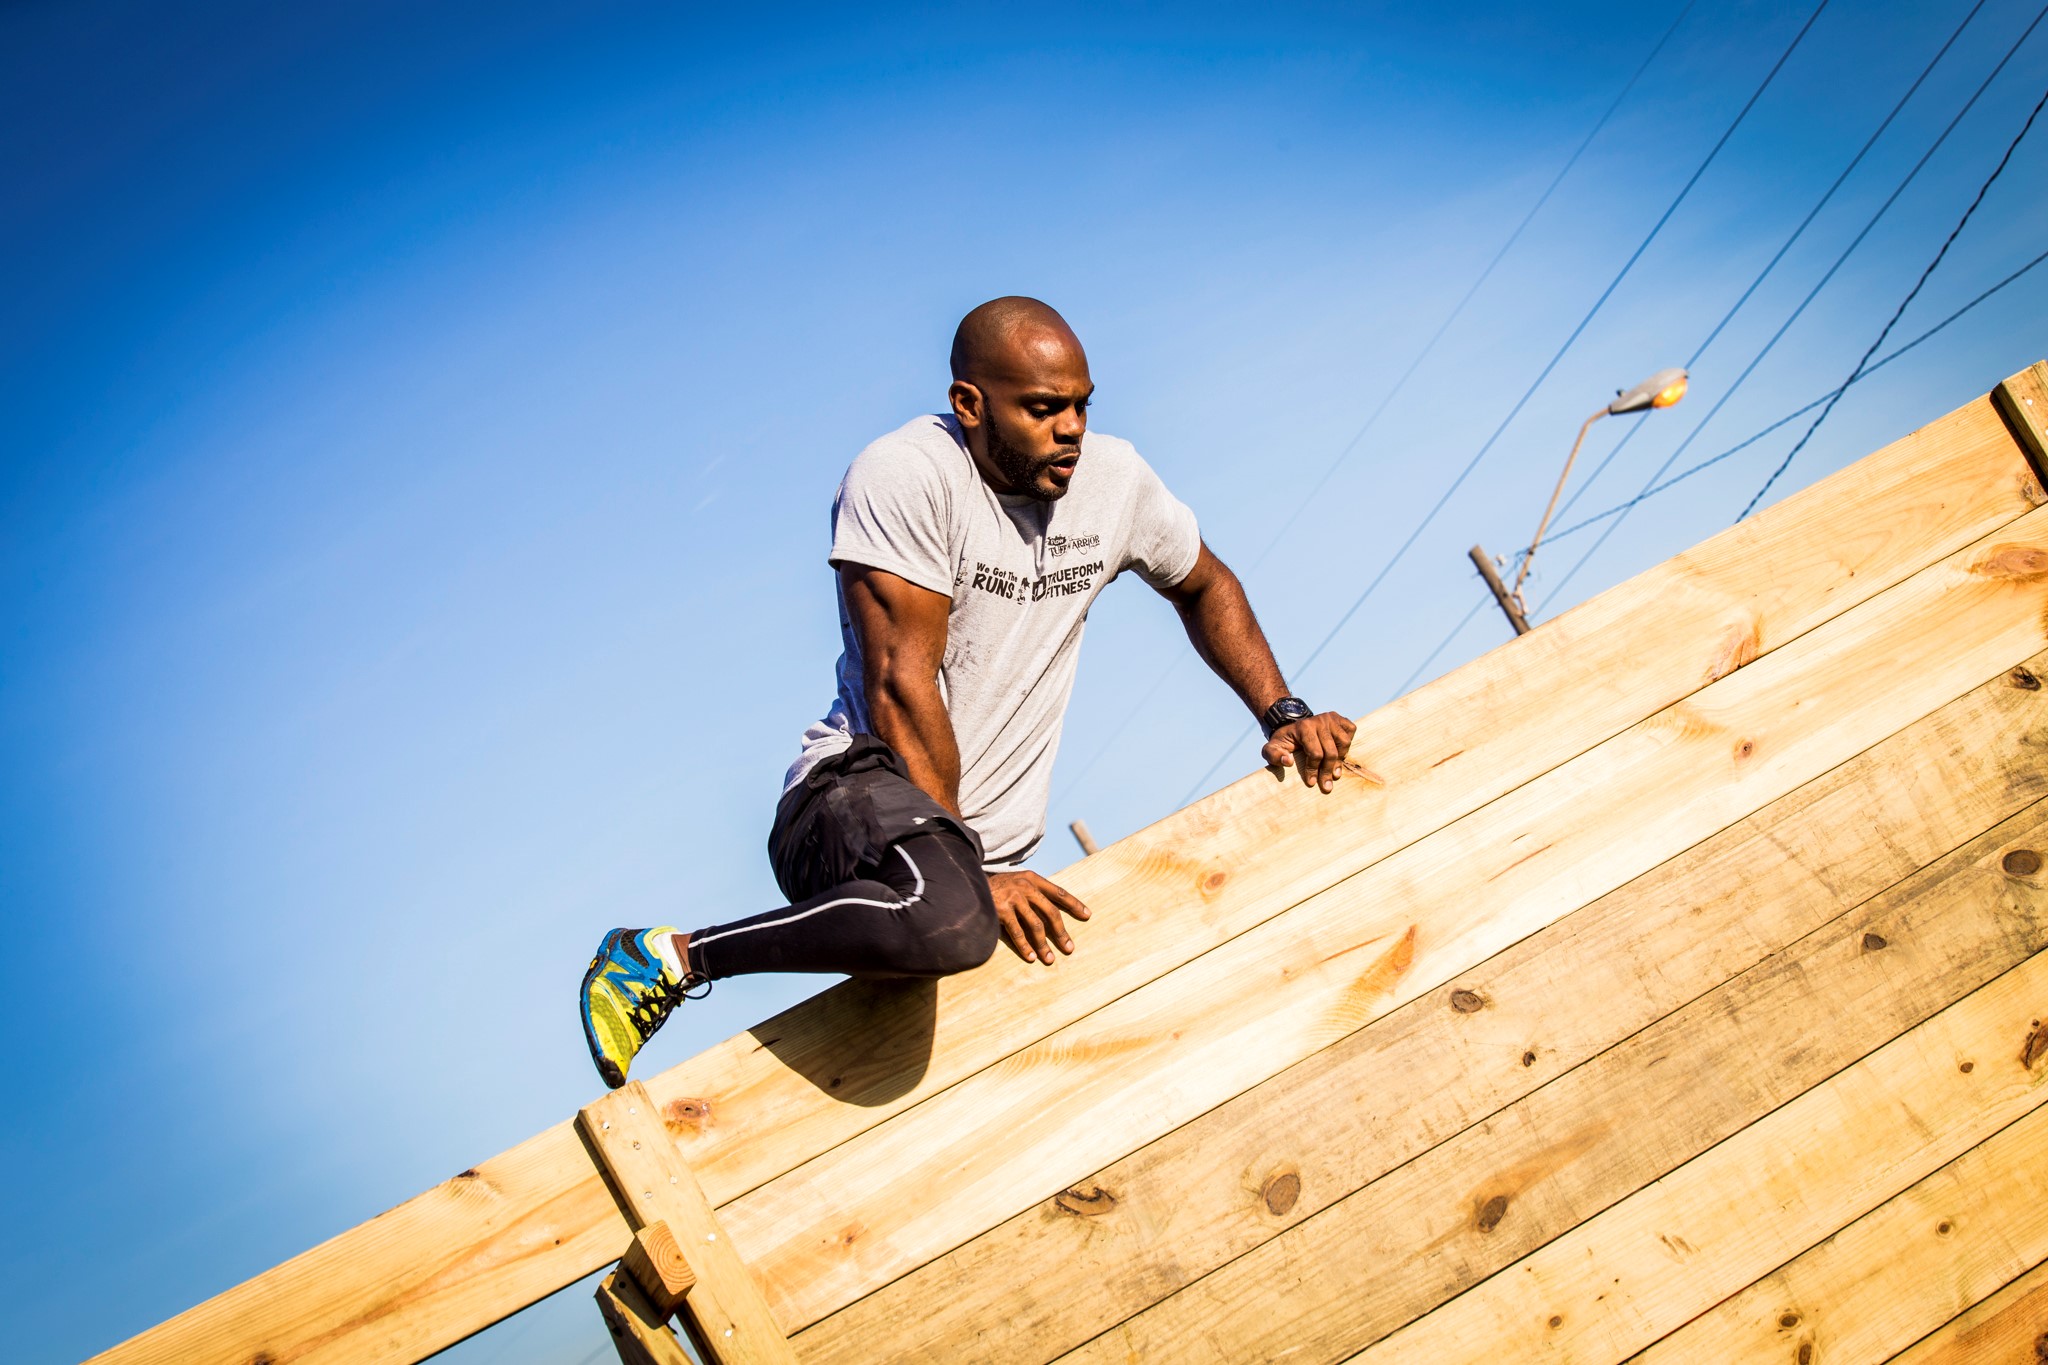 Jair Lyons True Form Fitness demonstrates how to scale a wall obstacle